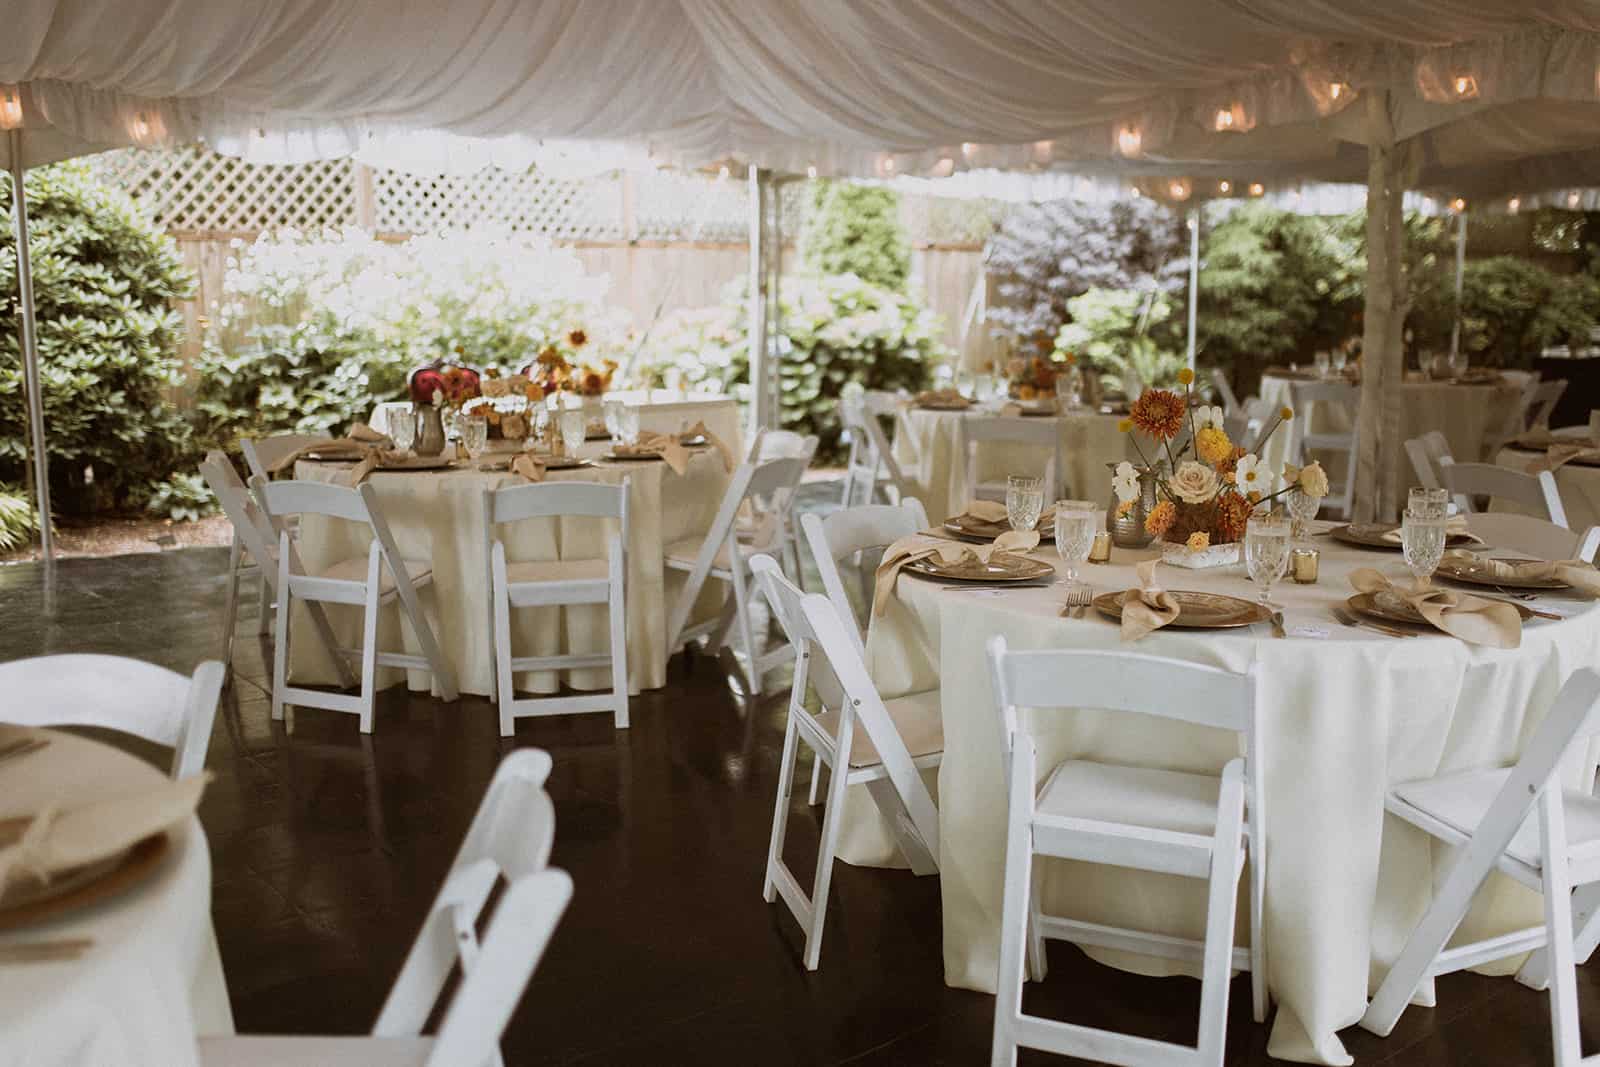 A dining tent set with round tables, chairs, and place settings with floral centerpieces.